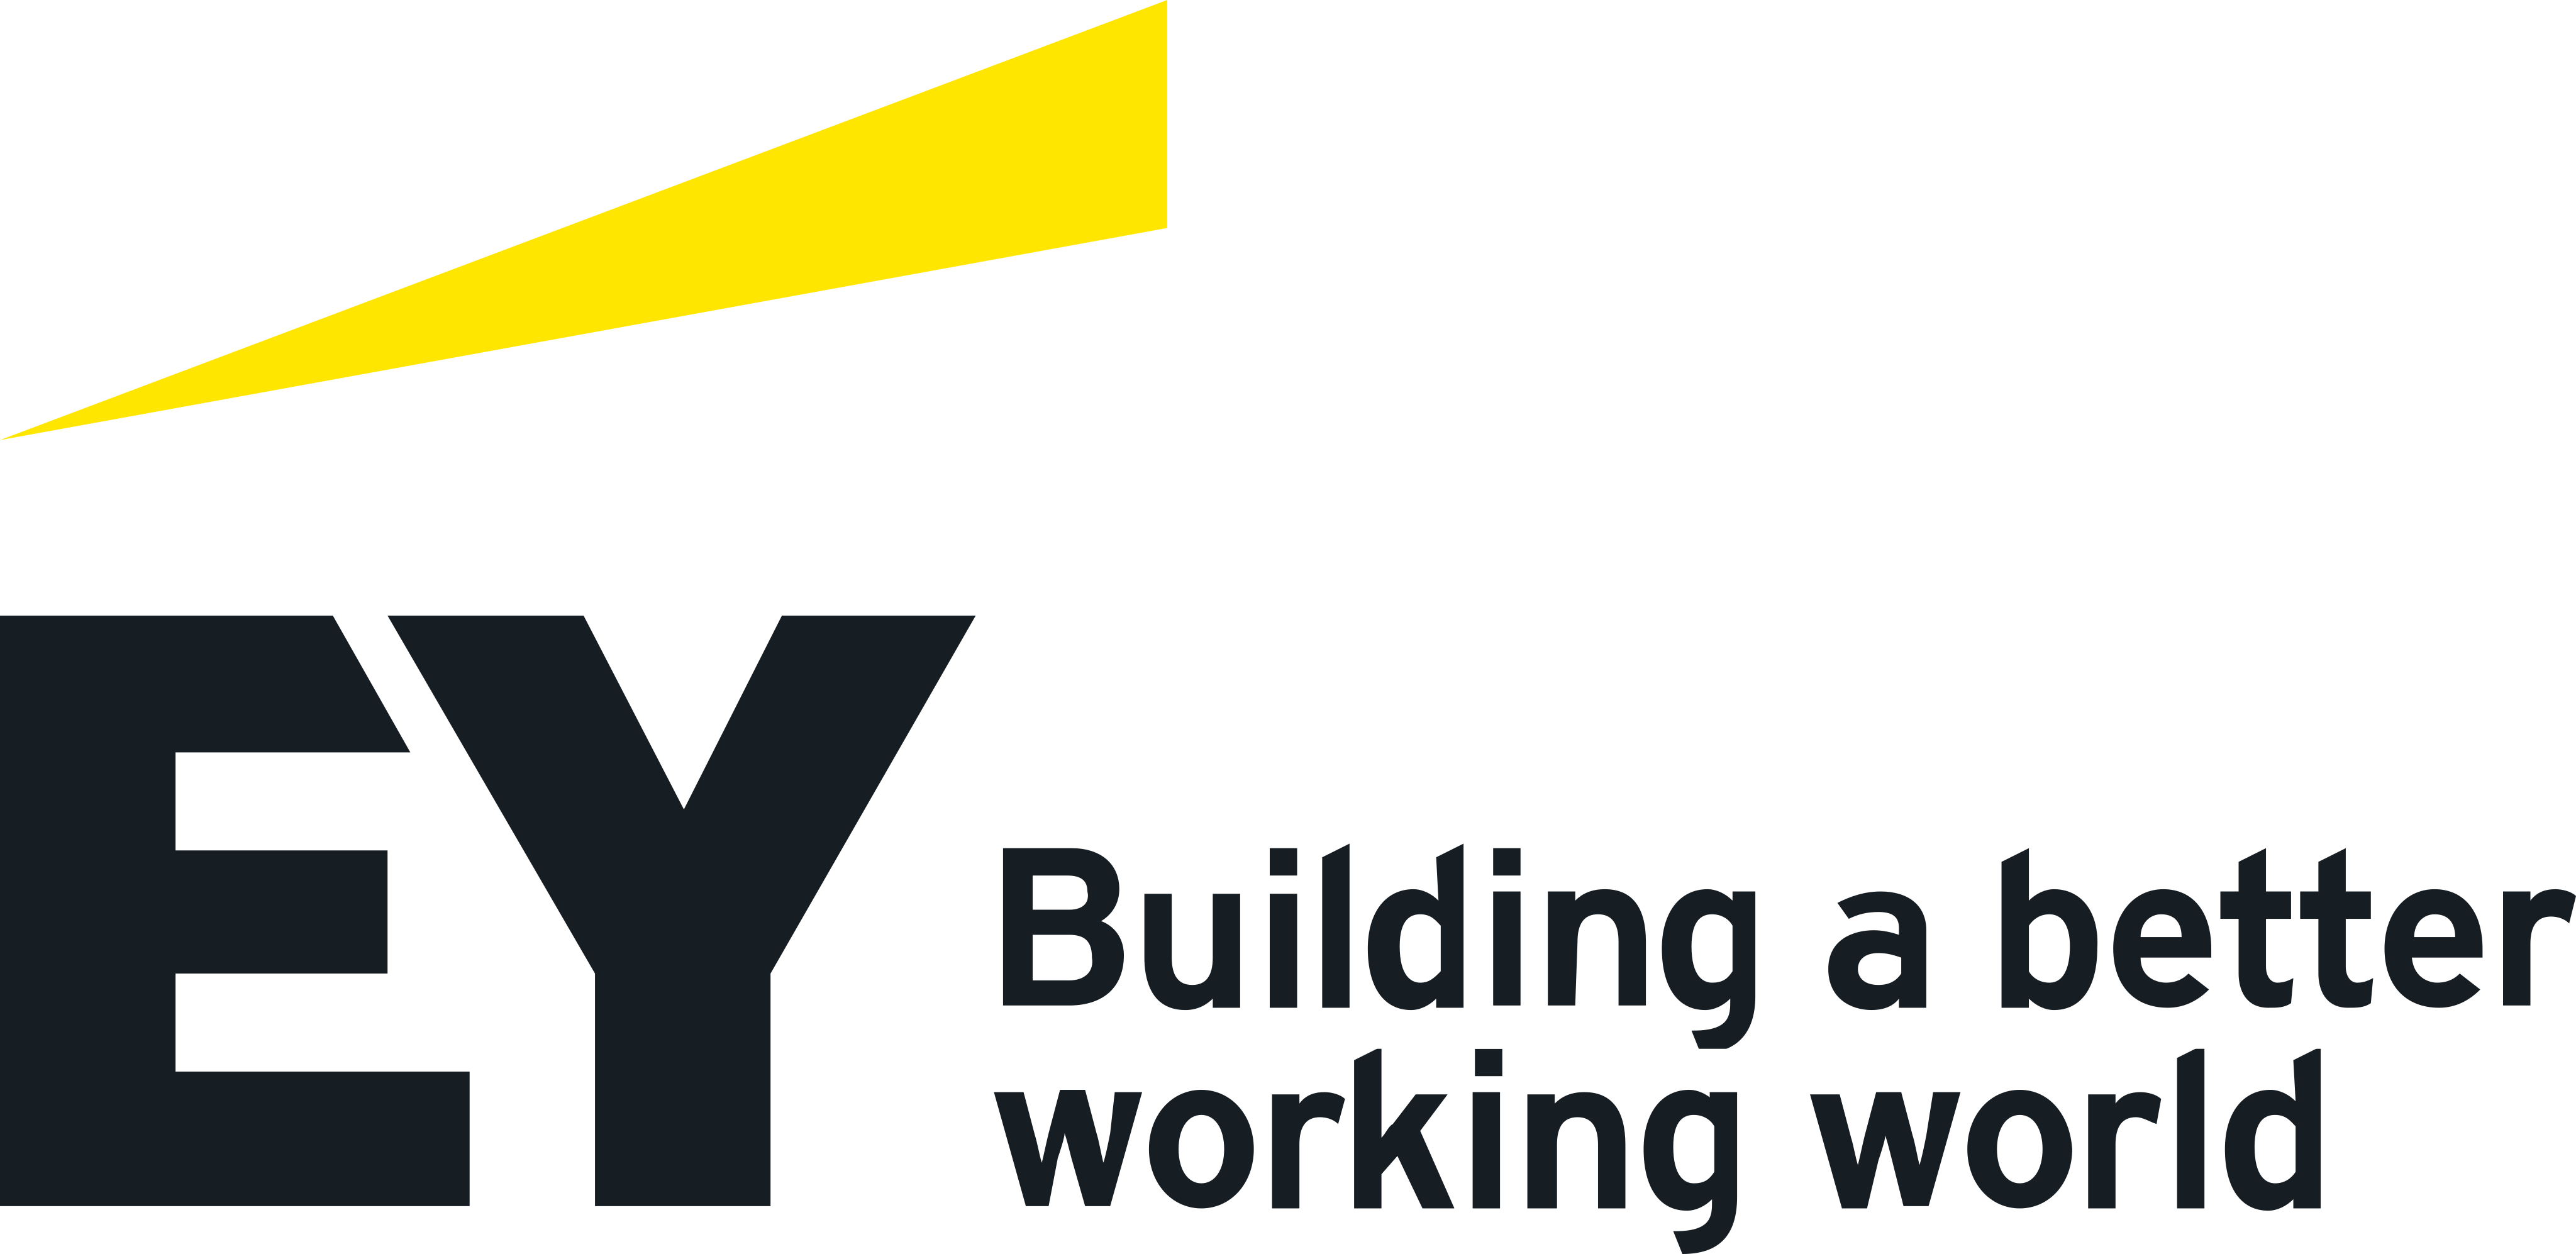 ernst-young-logo (opens in a new tab)